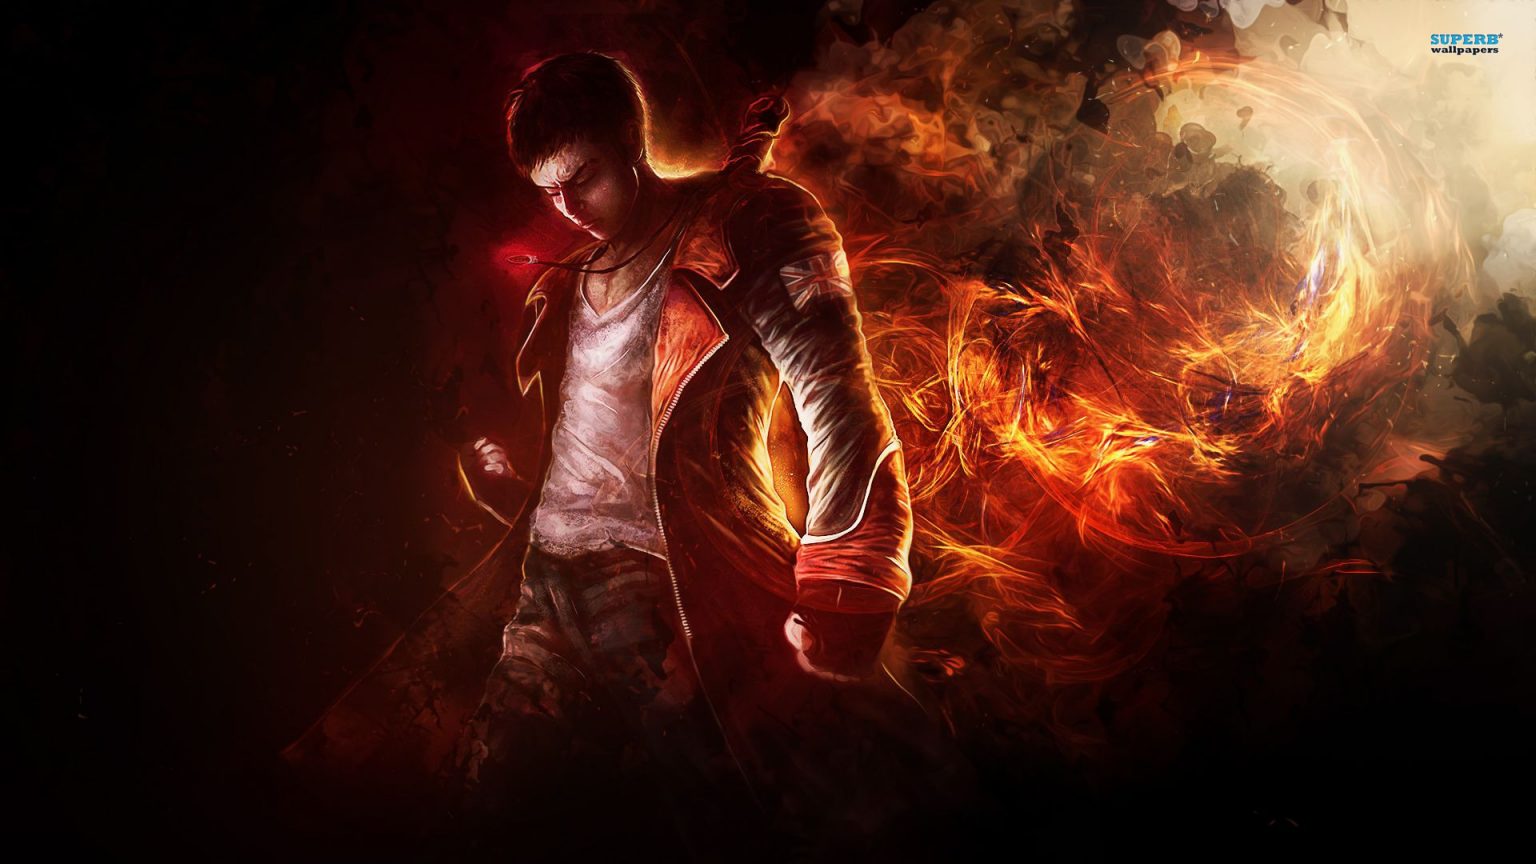 Devil May Cry Wallpapers | HD Background Images | Photos | Pictures ...